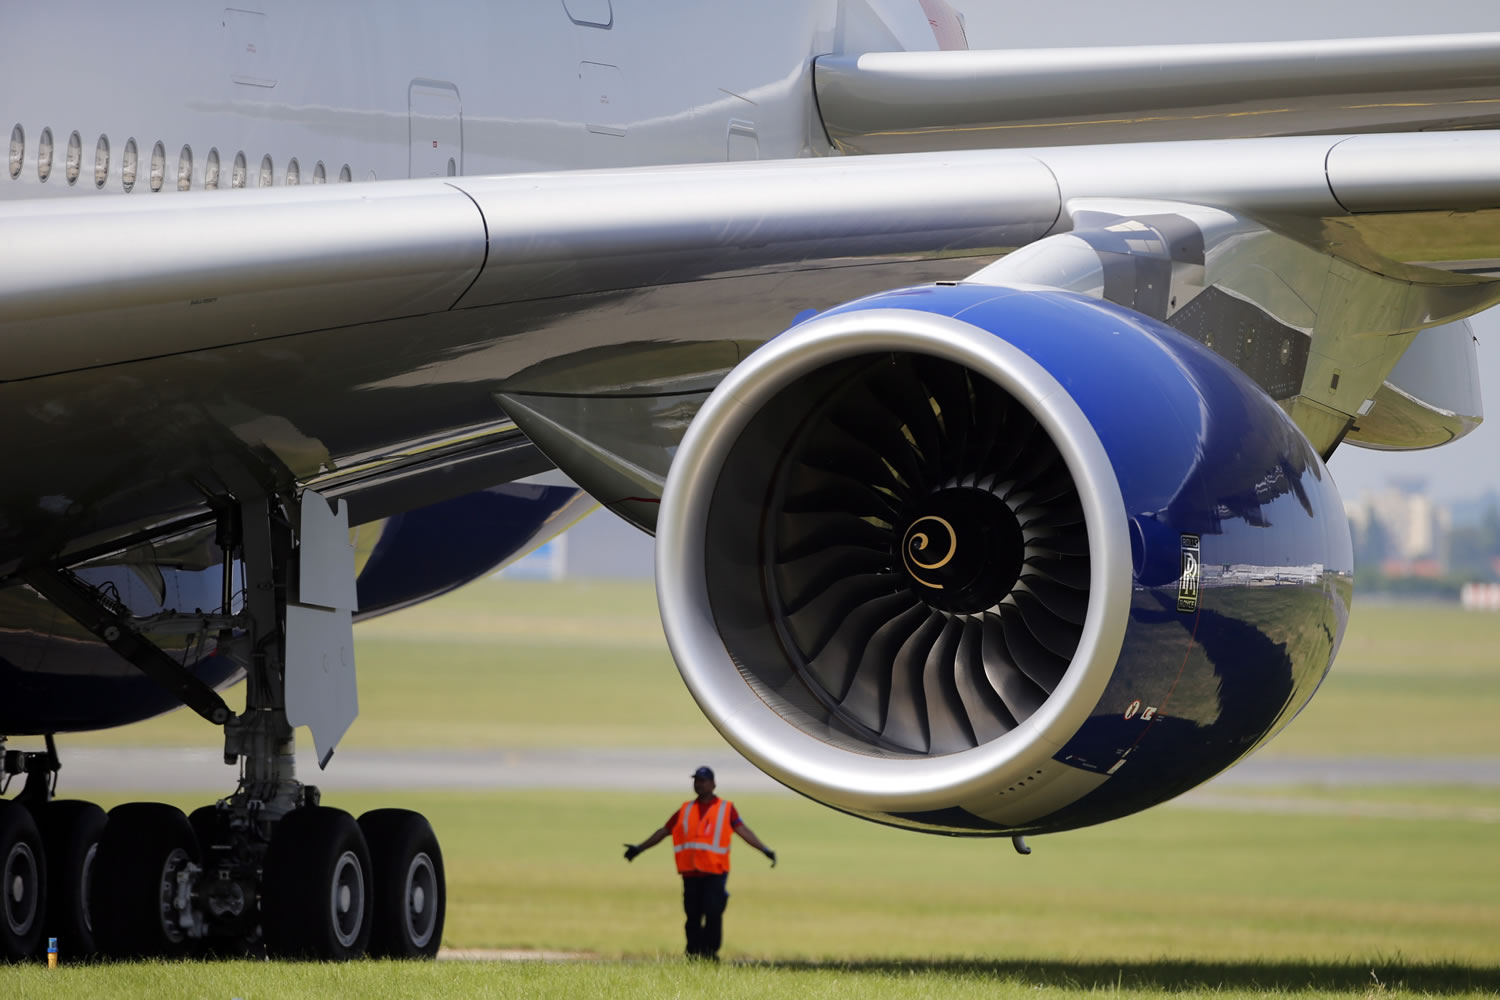 A ground controller stands next to the Rolls Royce engine of a British Airways Airbus A380 during the first day of the 50th Paris Air Show at Le Bourget airport in June.